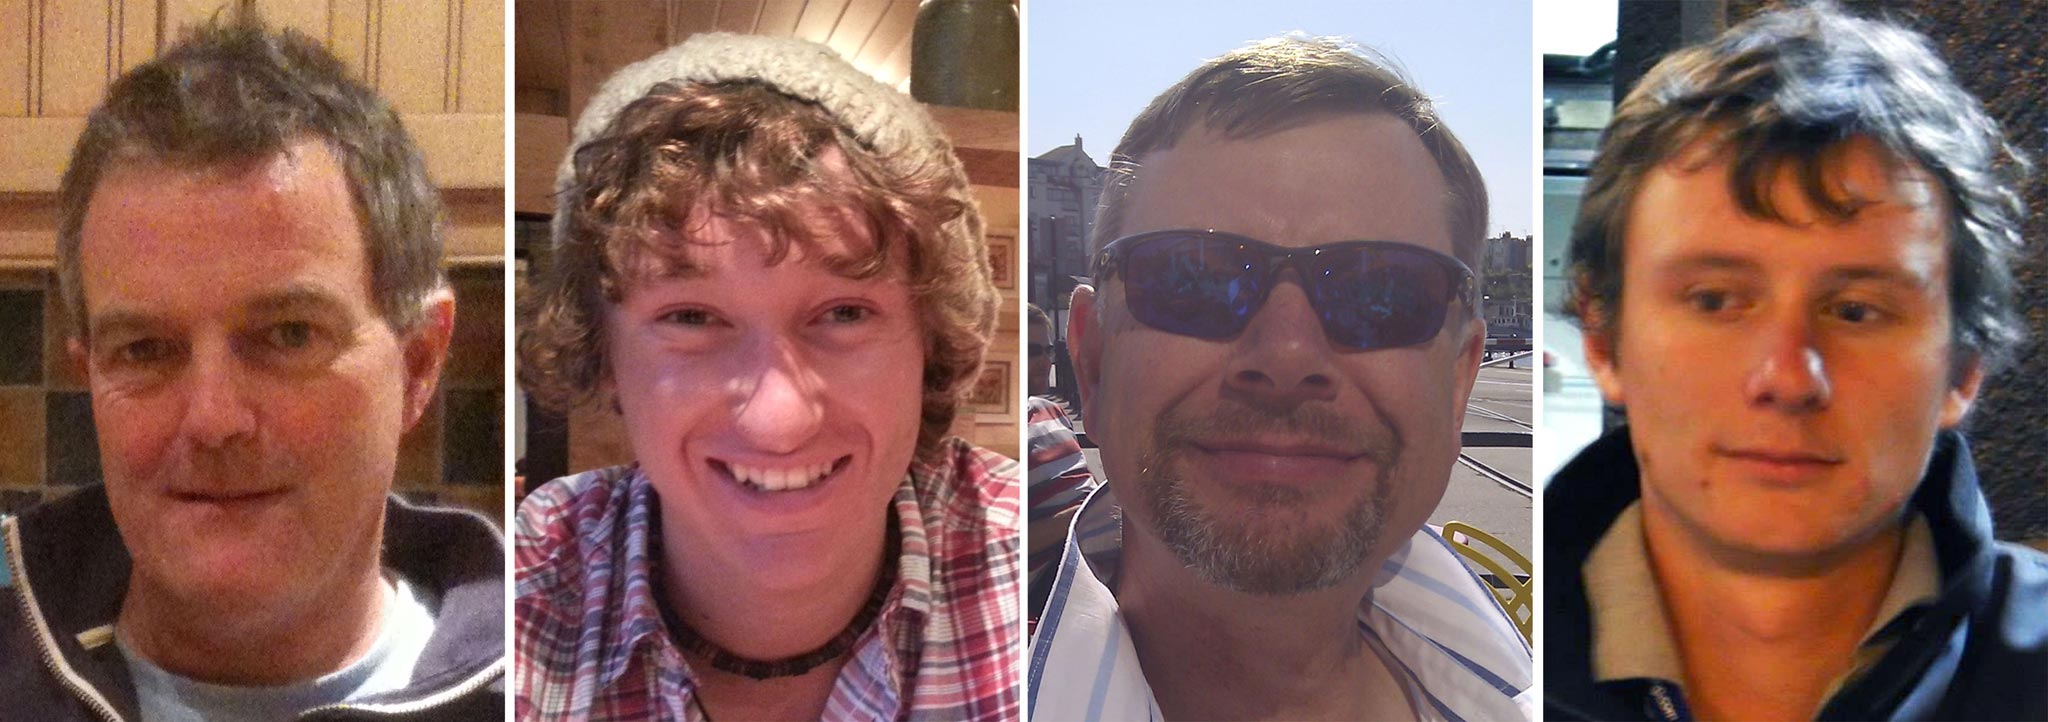 From left to right: Paul Gosling, James Male, Steve Warren and Andrew Bridge who are missing after the yacht ‘Cheeki Rafiki’ capsized in the mid-Atlantic Ocean